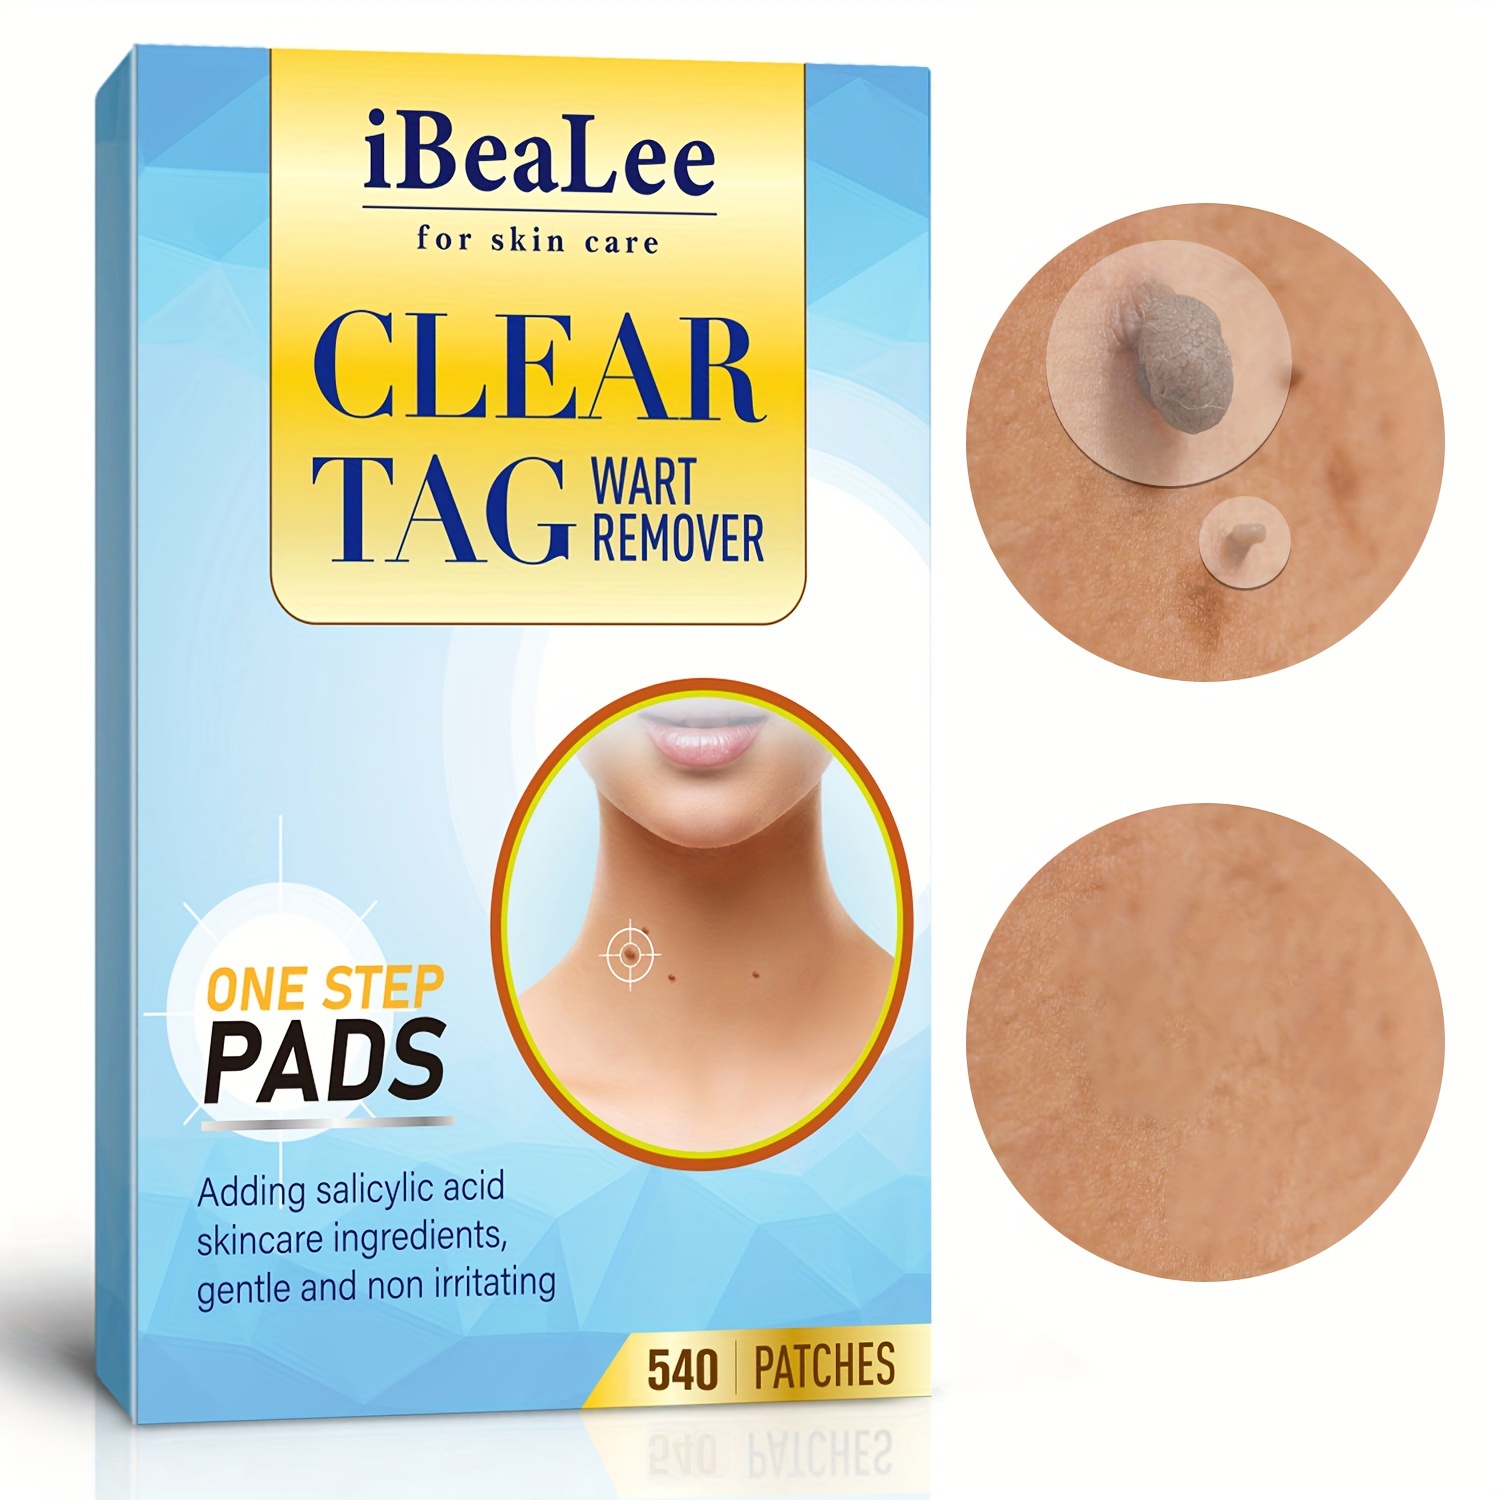 Tags Moles Remover Pen For Face Body, Mole Remover Fast Easy Effective In 5  Days Easy To Remove Tags, Moles, Warts